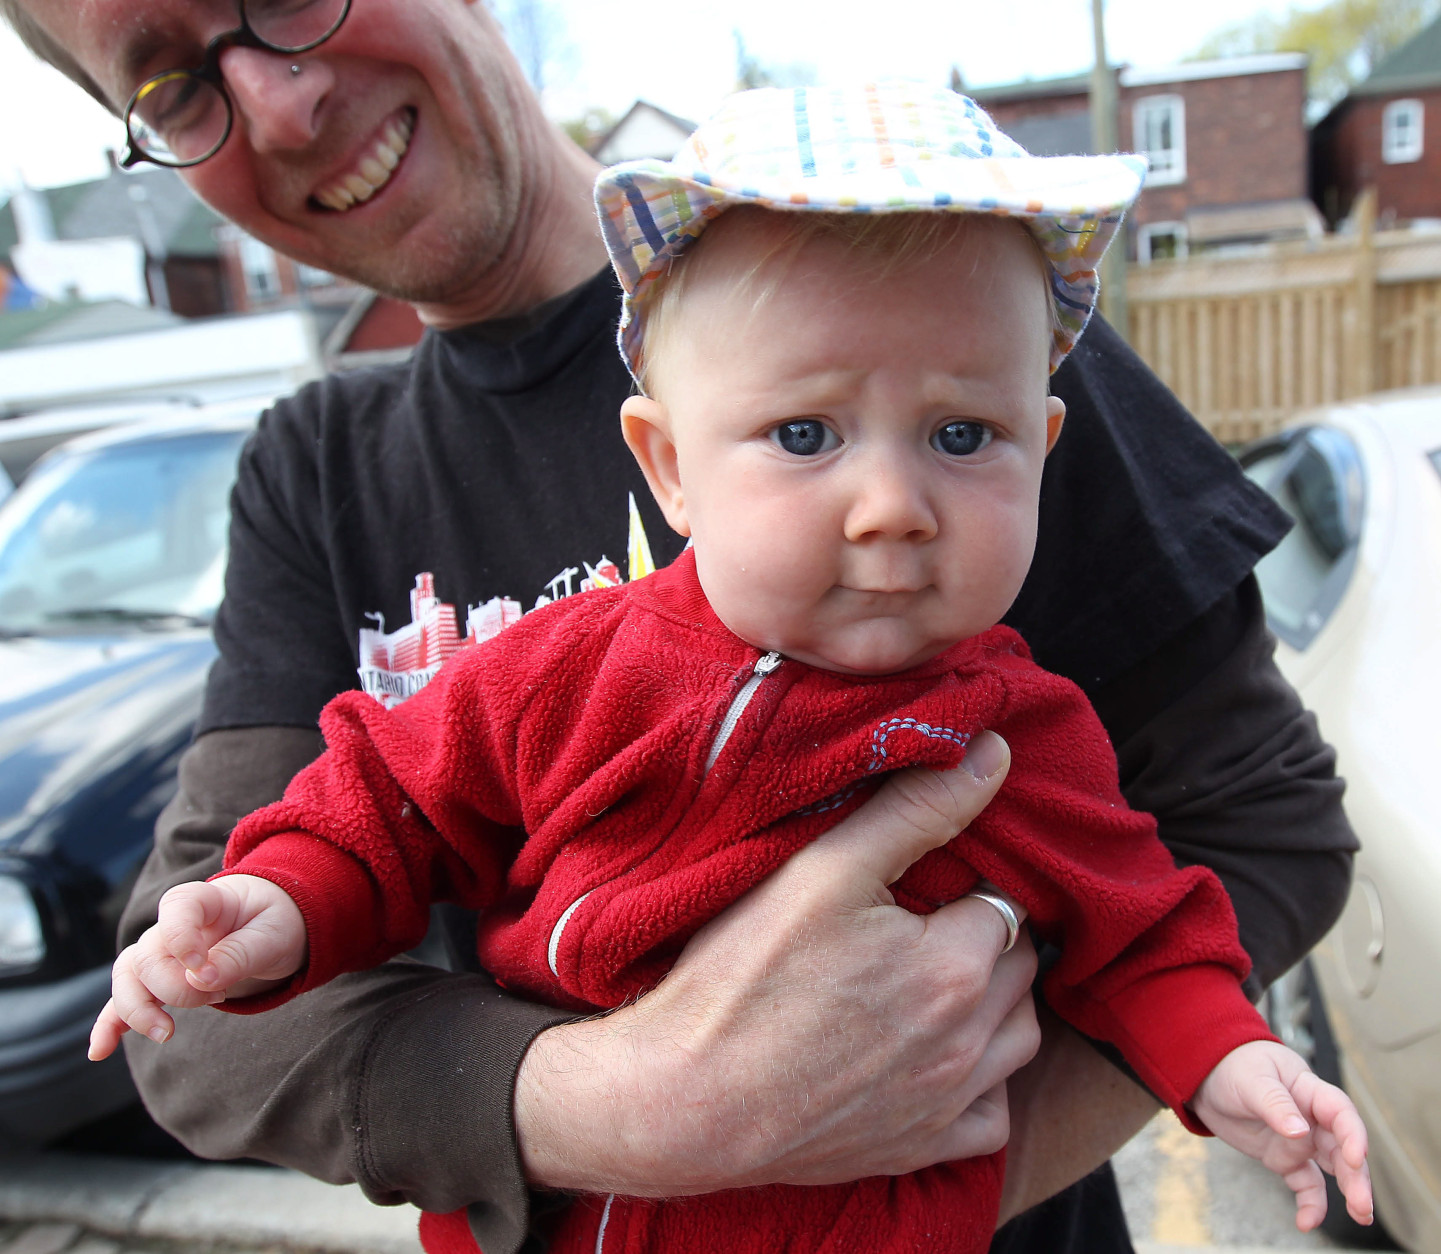 This May 7, 2011 photo shows David Stocker holding his 4-month-old child, Storm, in Toronto. Storm's parents, Kathy Witterick, 38, and Stocker, 39, of Toronto, have chosen to keep the gender of Storm a secret. They have shared Storms's gender only with their sons Jazz, 5, and Kio, 2, a close family friend and two midwives who helped deliver the baby.   (AP Photo/THE CANADIAN PRESS/Toronto Star, Steve Russell)